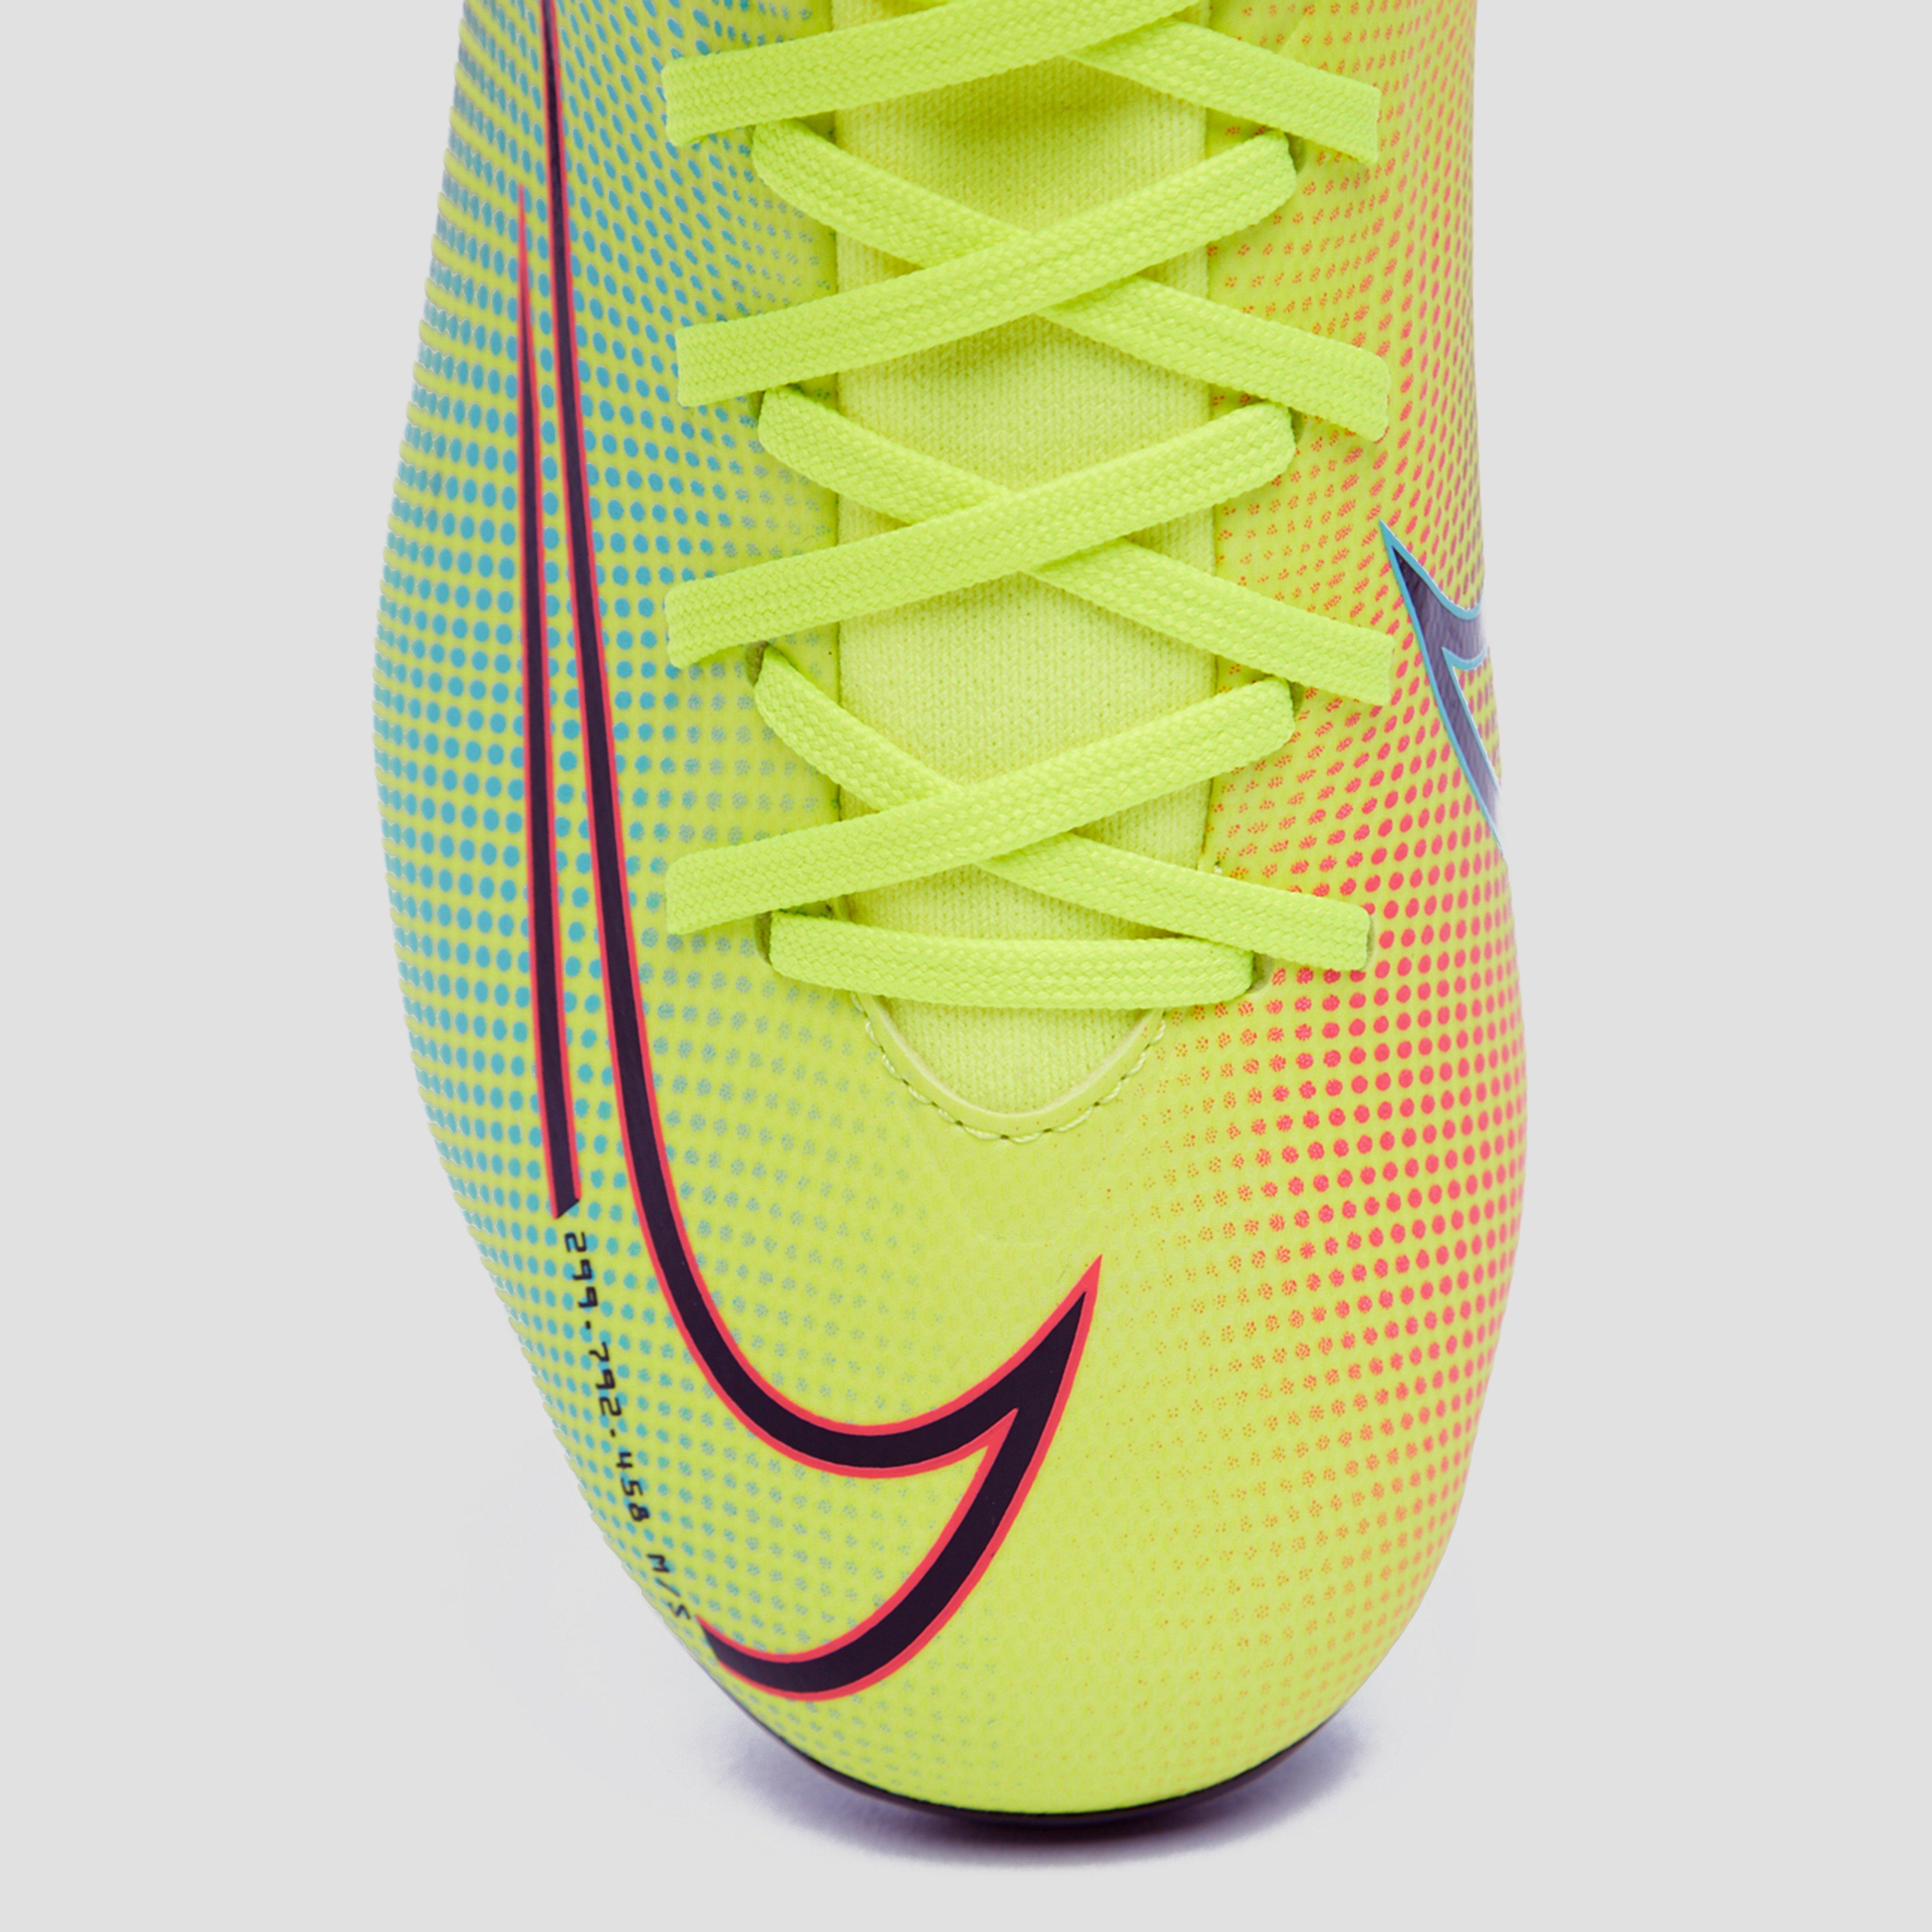 Nike Mercurial Superfly Vi Academy Mg Fitness Shoes.